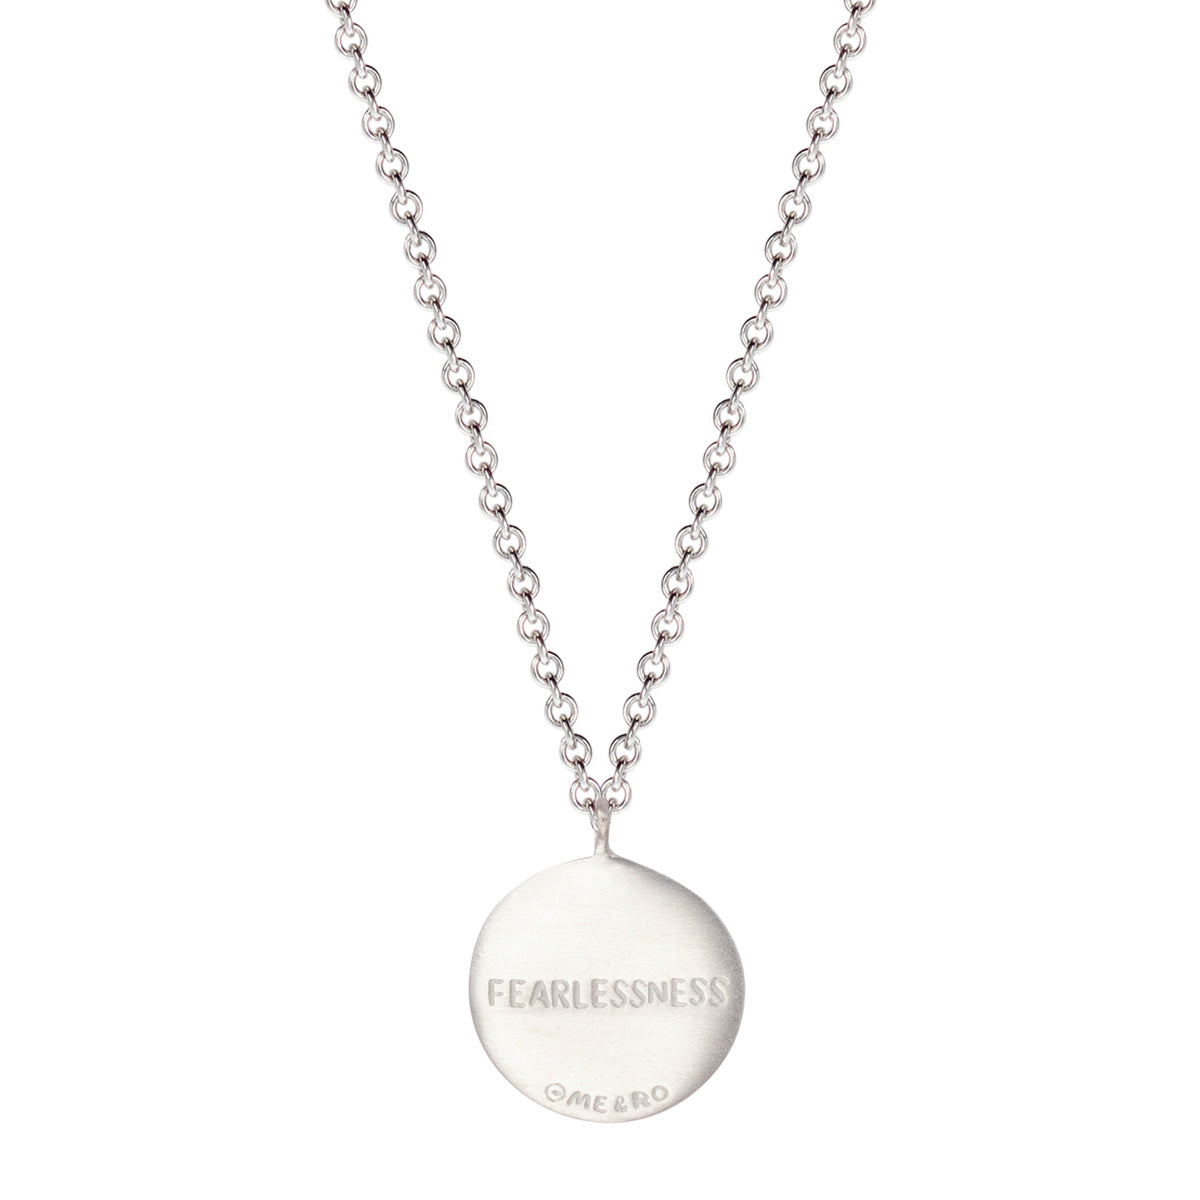 Sterling Silver Fearlessness Disc Pendant